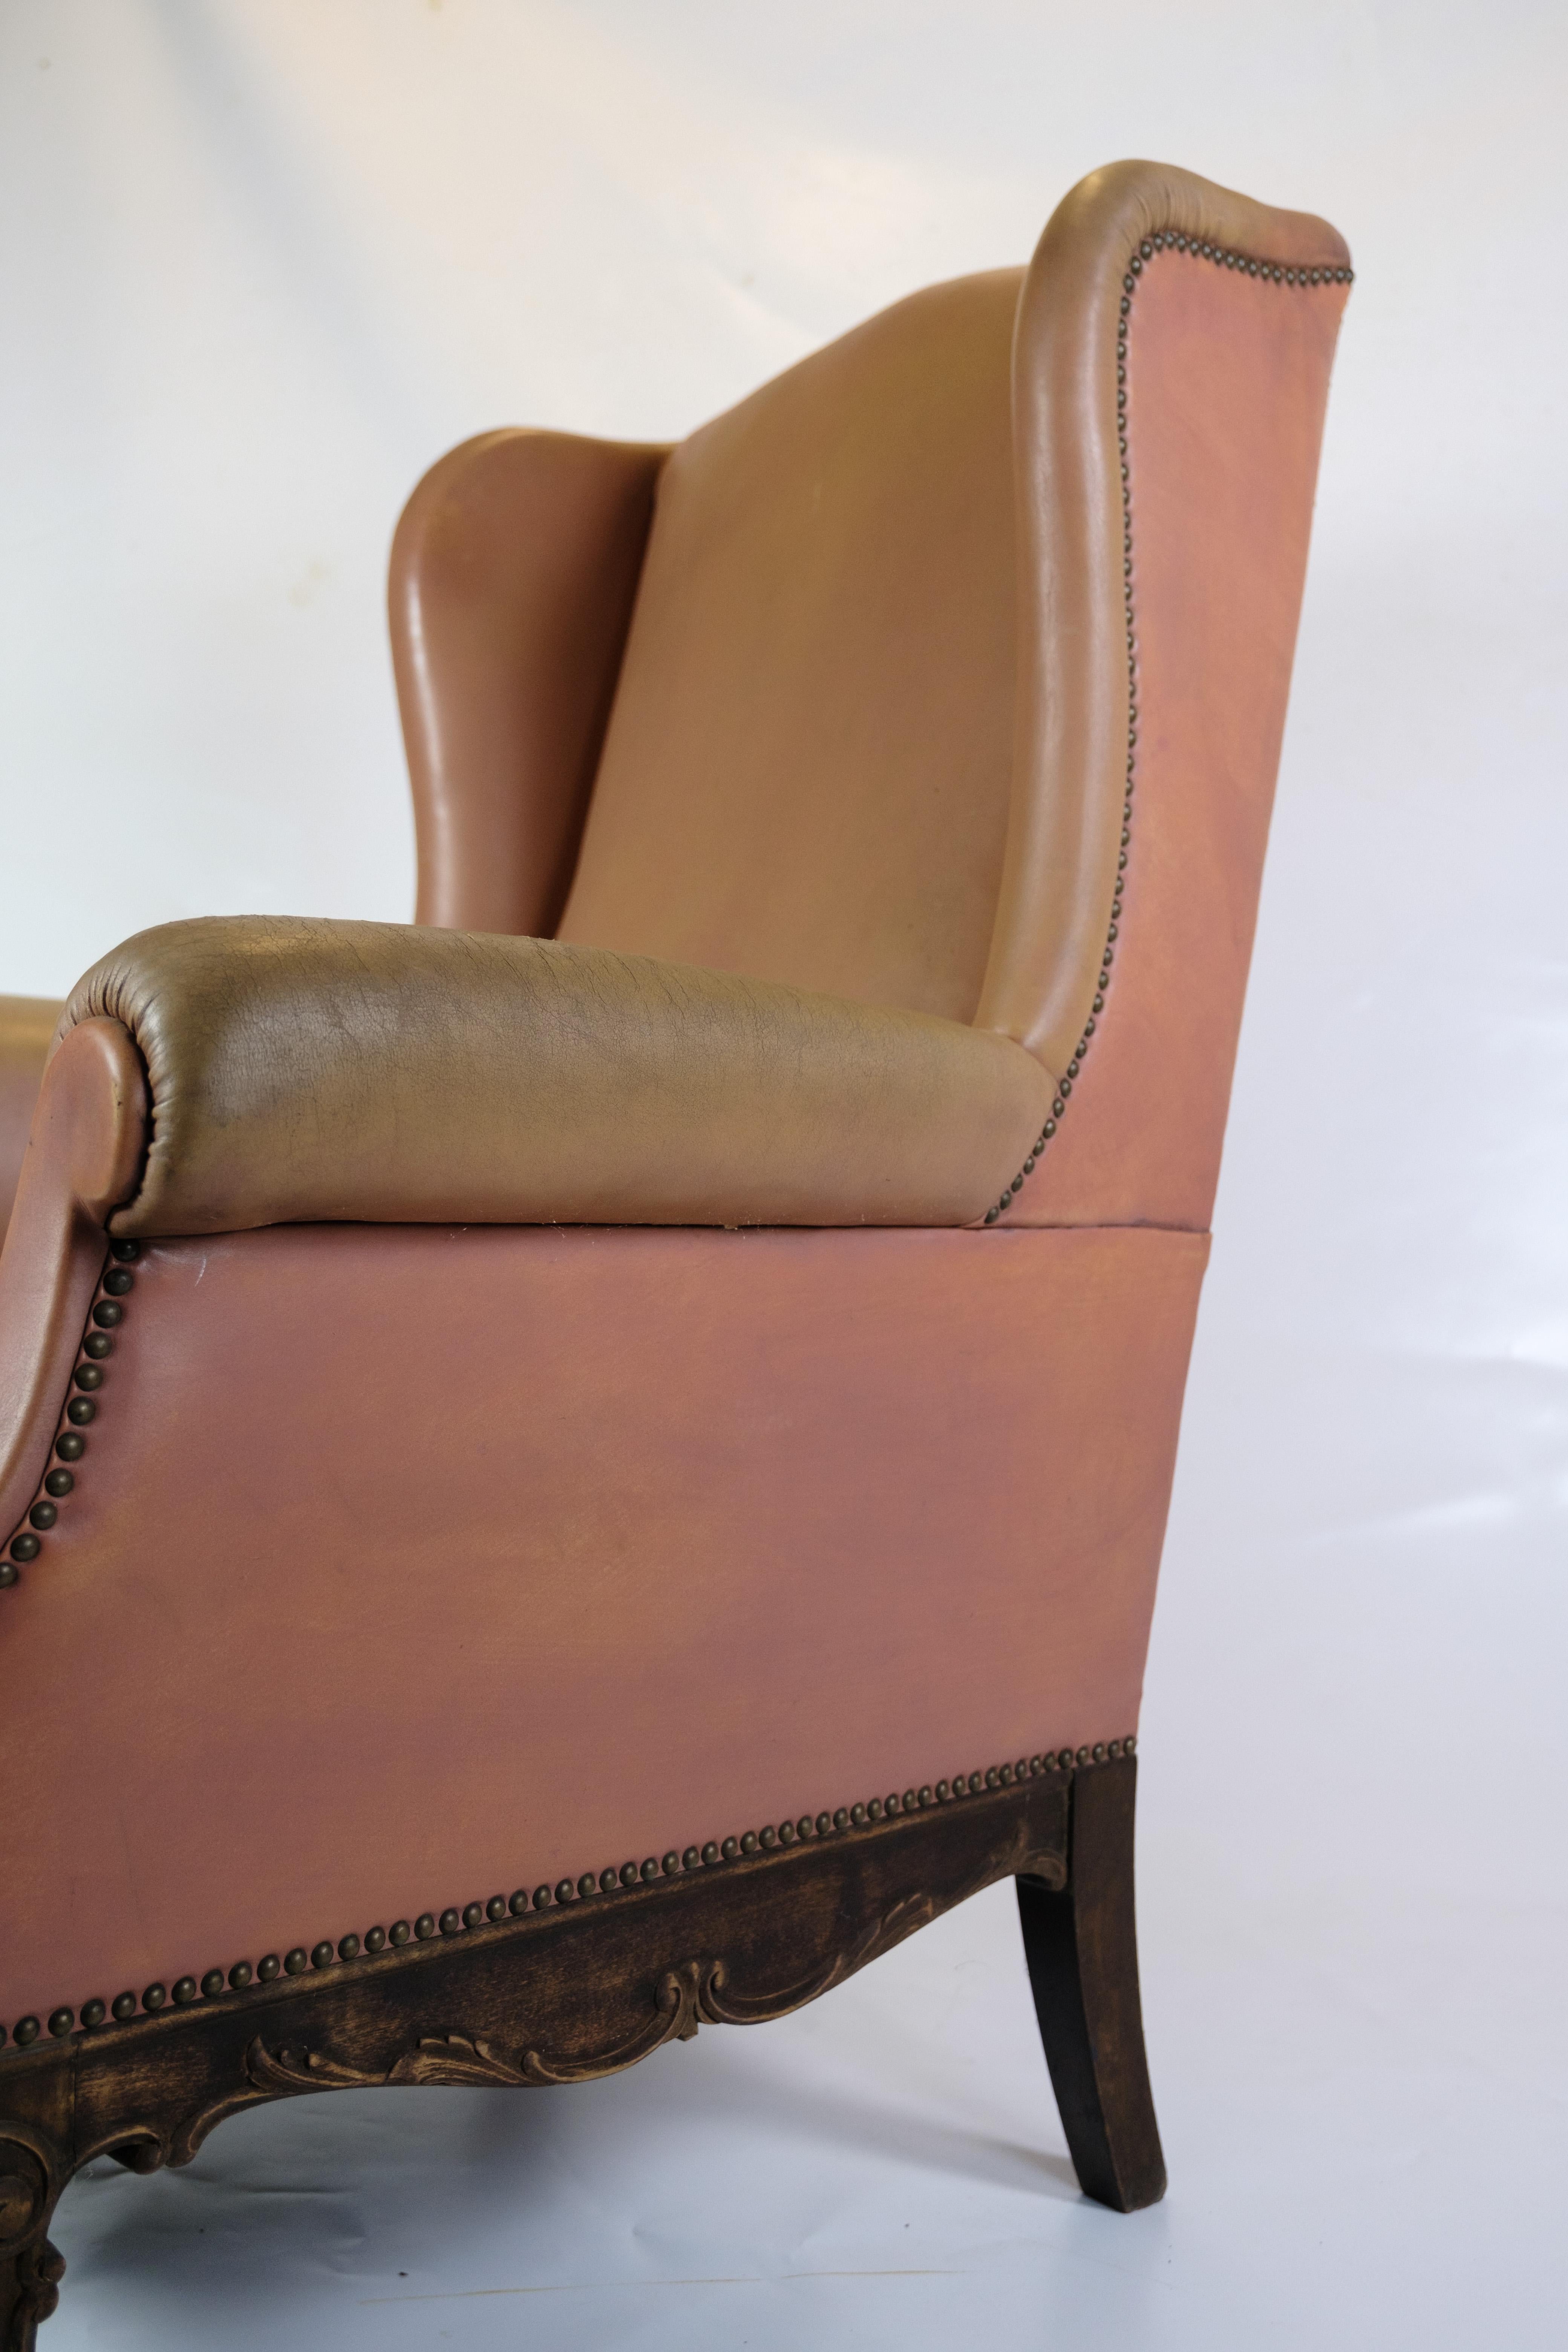 Antique High Flap Chair, Chesterfield Style Made In Brown Leather From 1920s For Sale 4